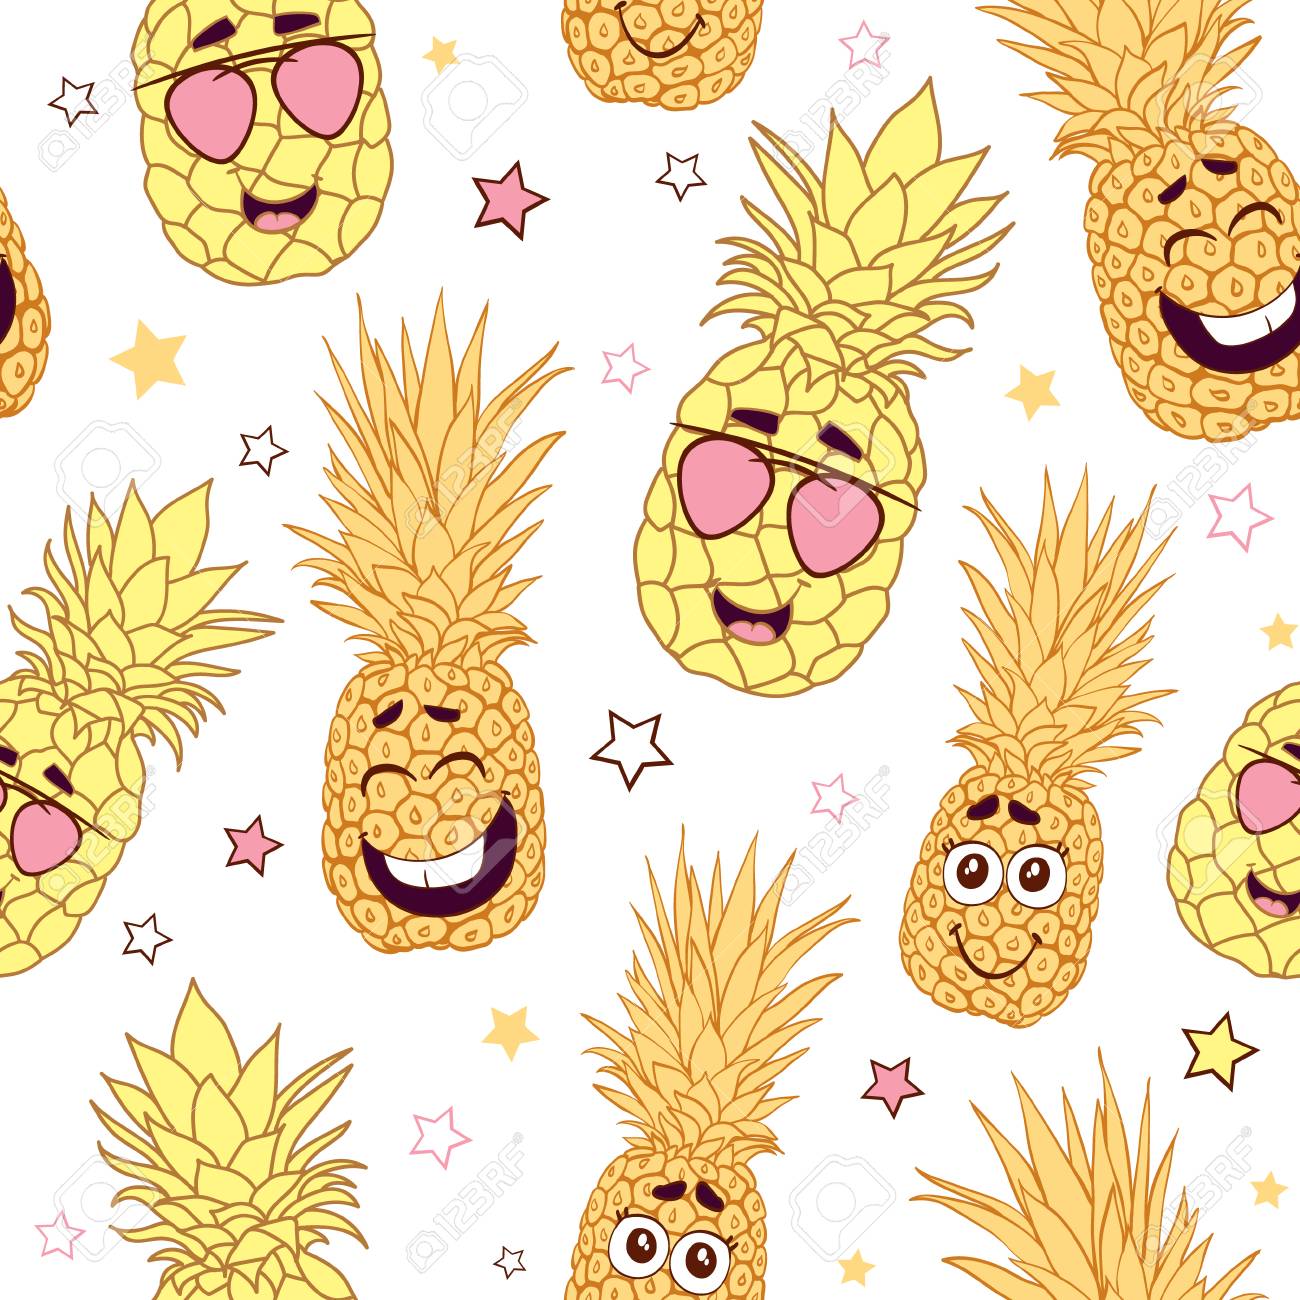 Fun Pineapple Faces Seamless Repeat Pattern Great For Tropical